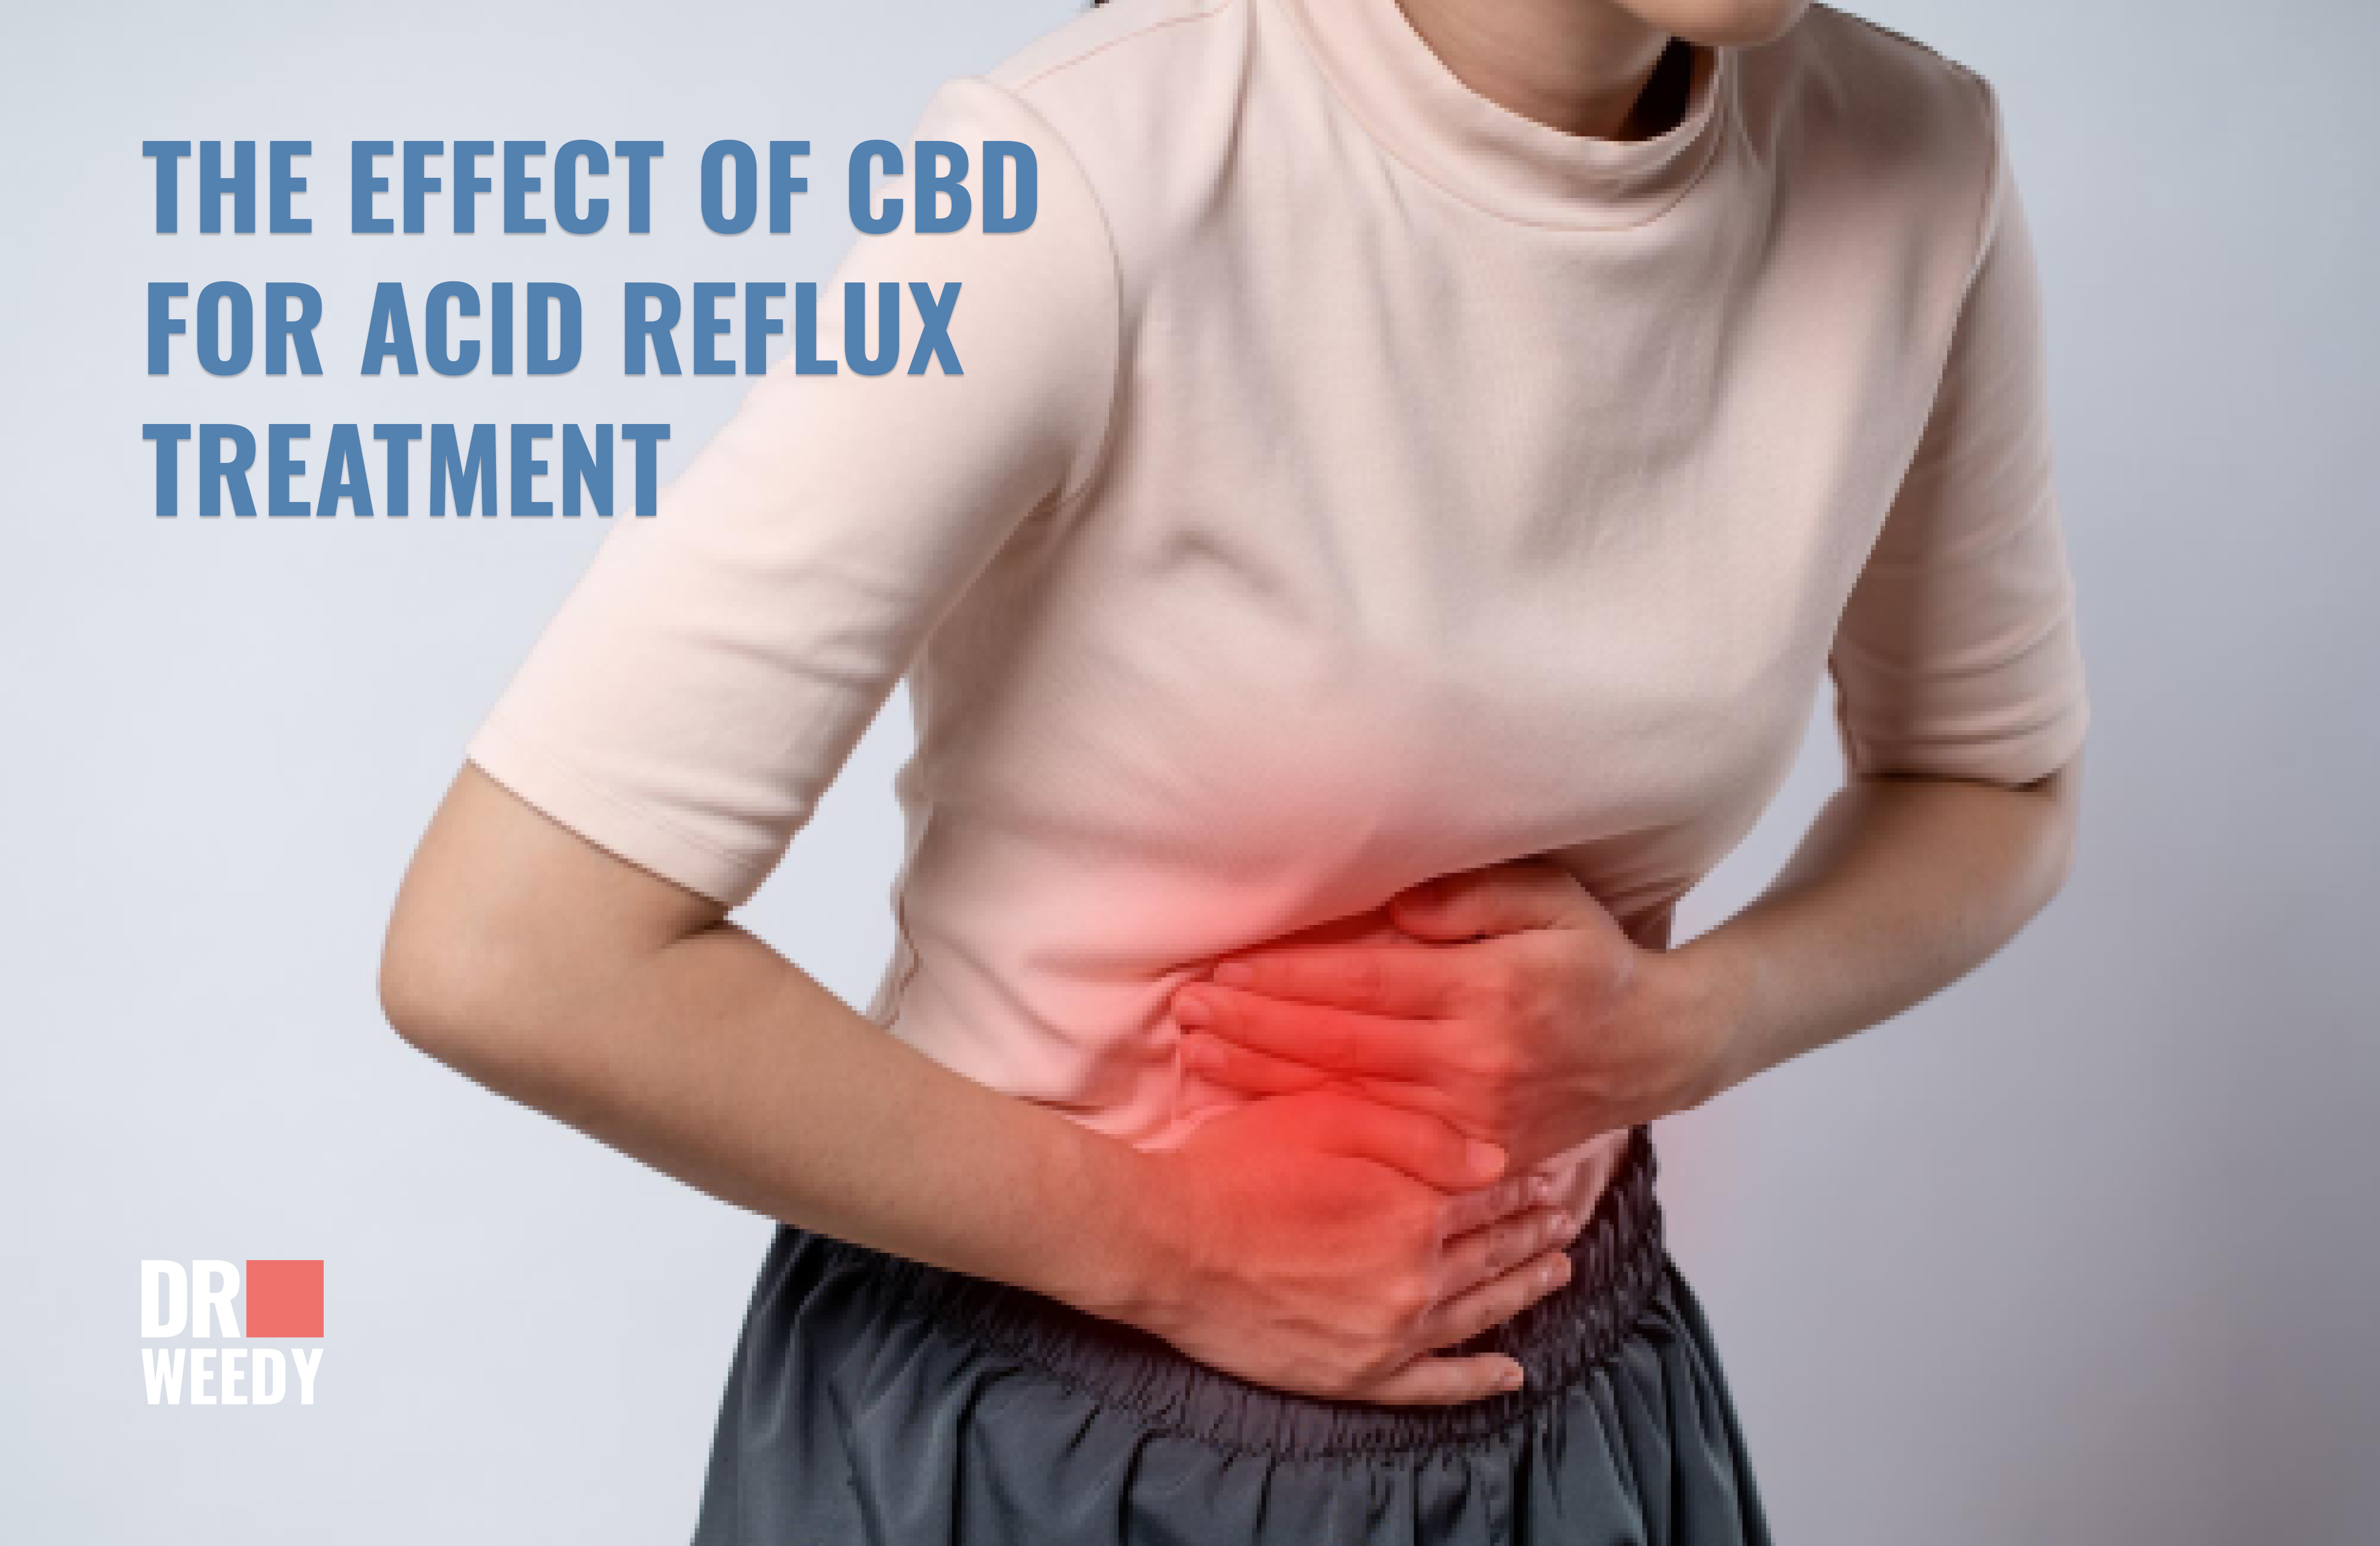 The Effect Of CBD For Acid Reflux Treatment